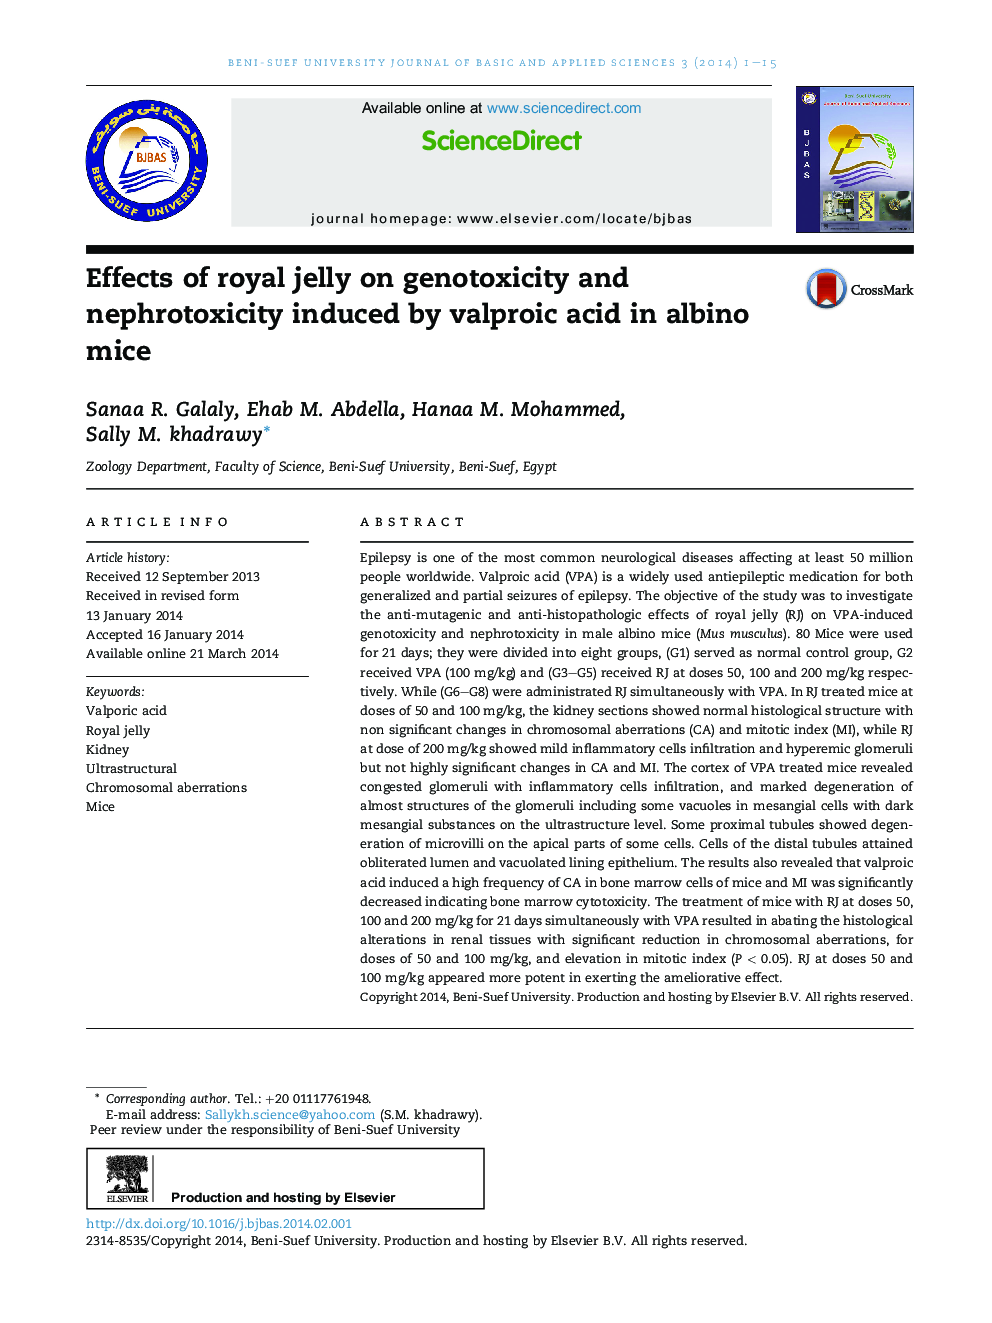 Effects of royal jelly on genotoxicity and nephrotoxicity induced by valproic acid in albino mice 